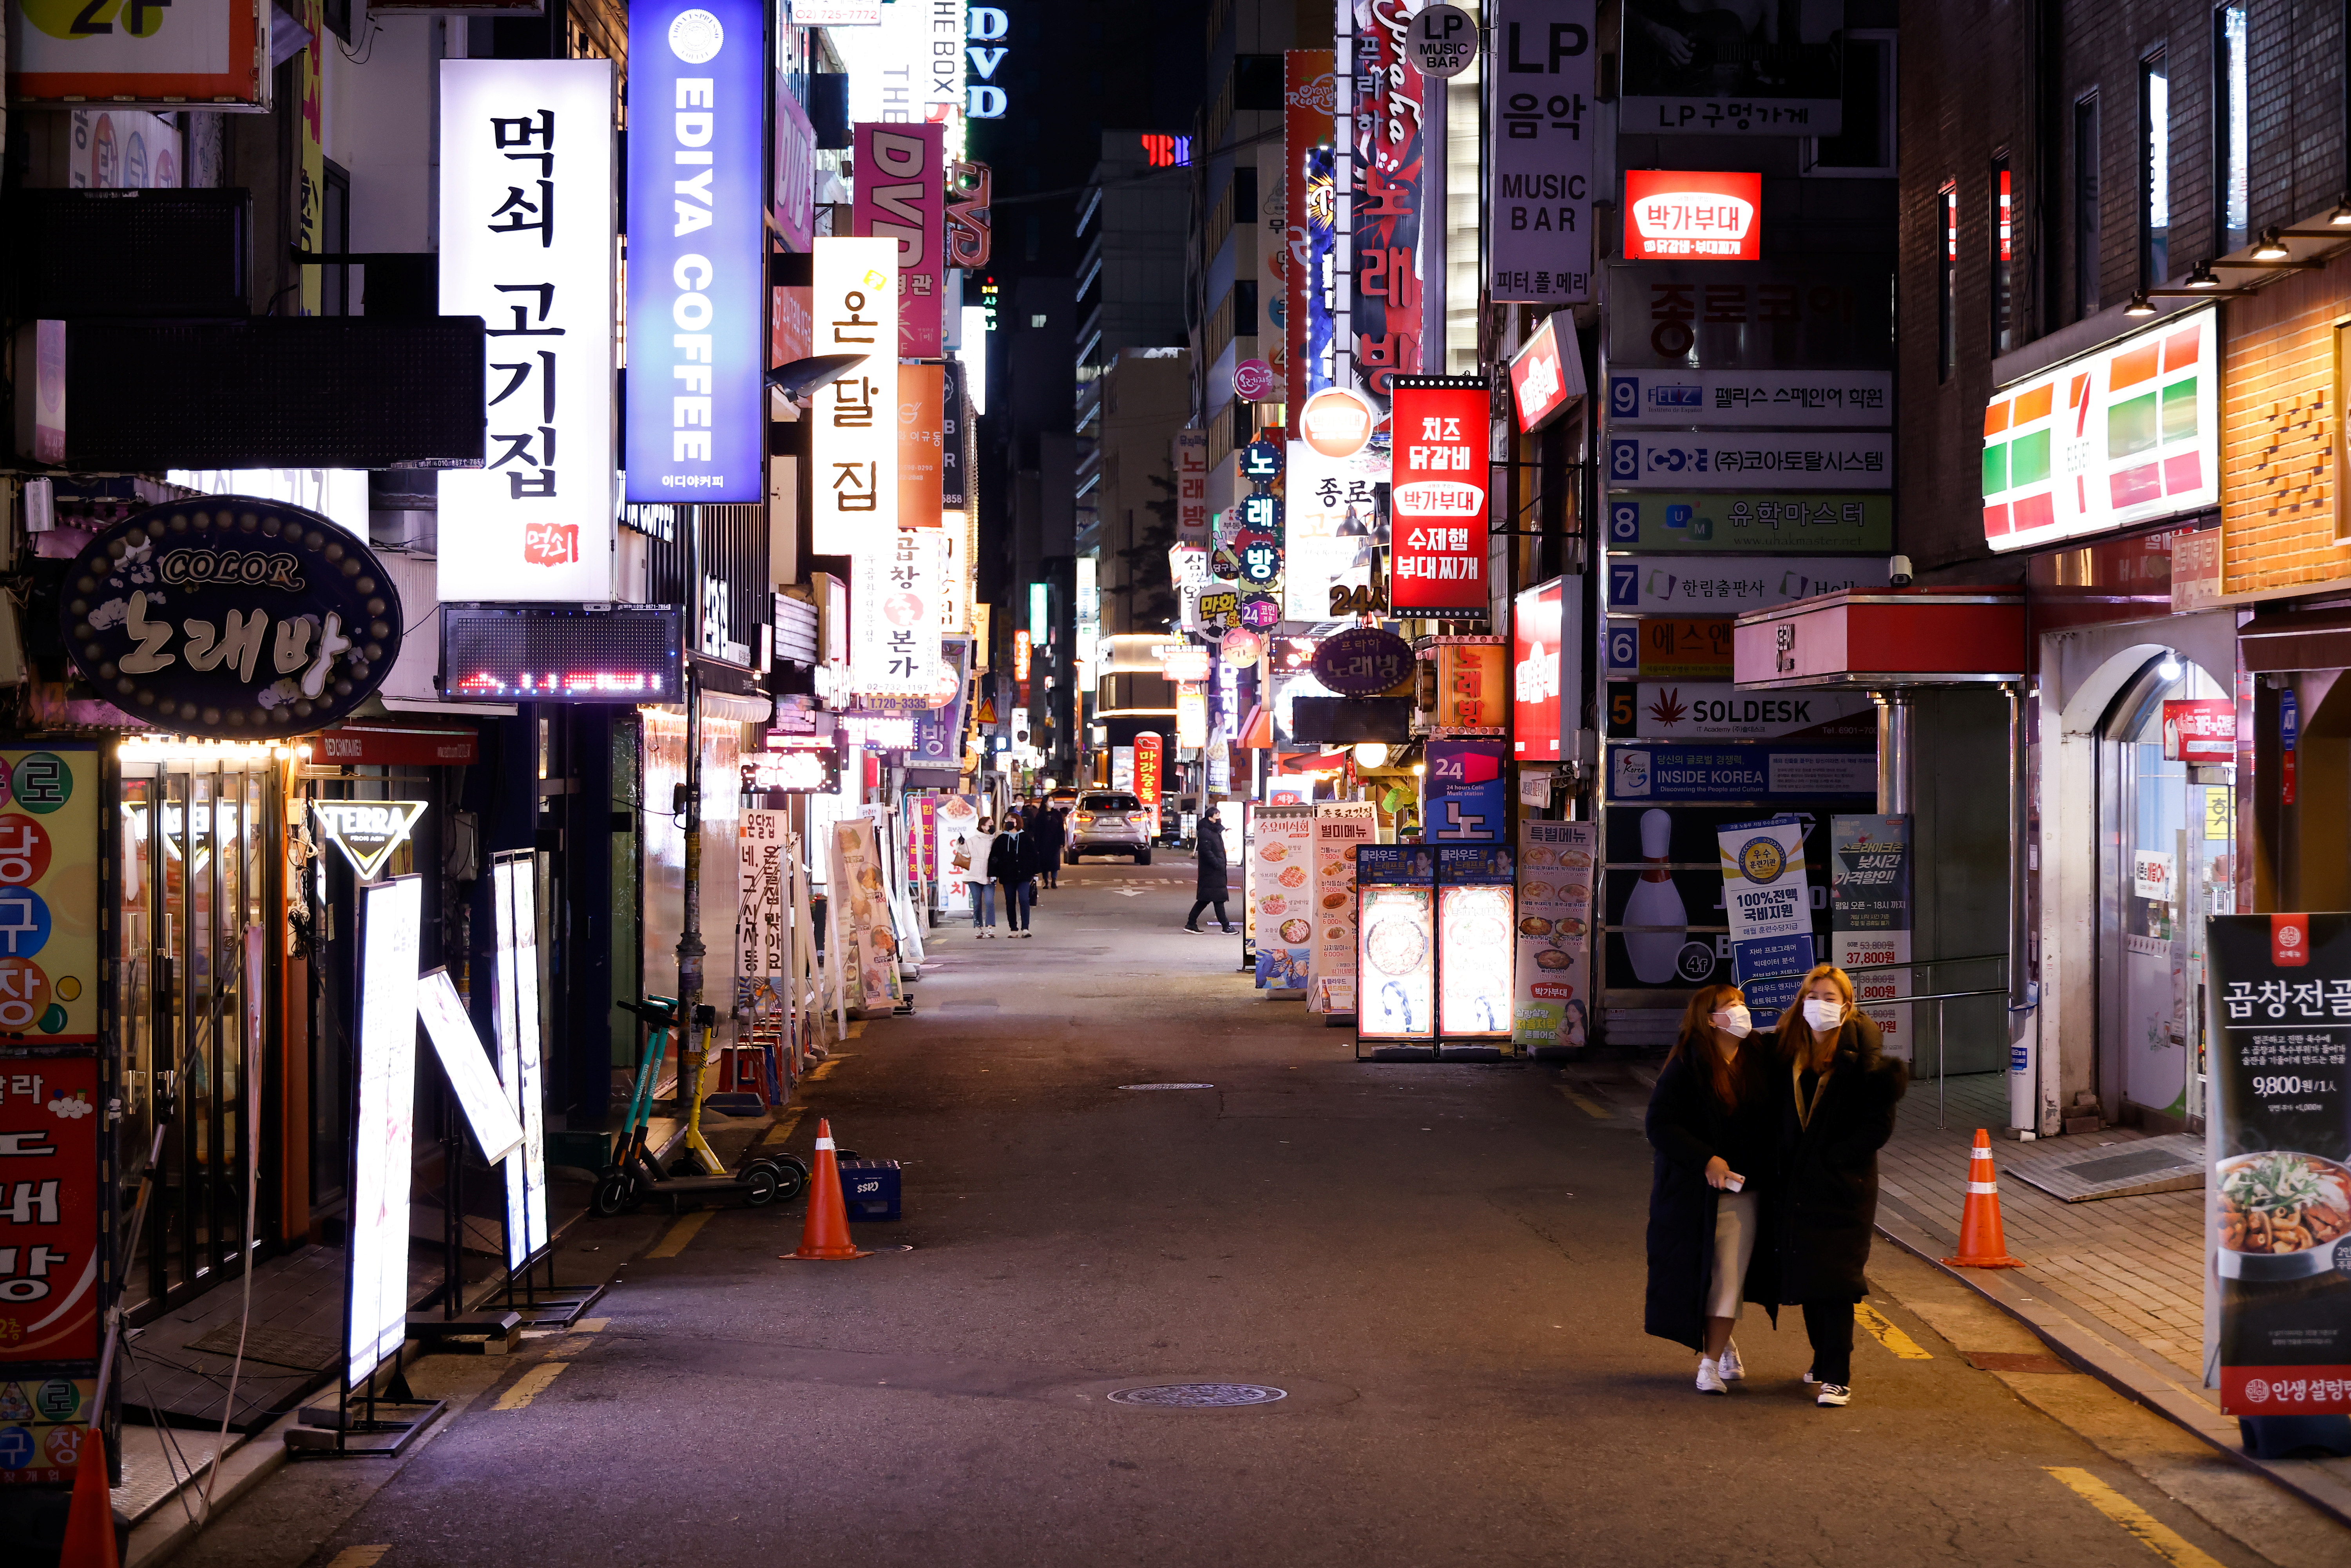 Women walk on an empty street affected by heightened social distancing rules amid the coronavirus disease (COVID-19) pandemic in Seoul